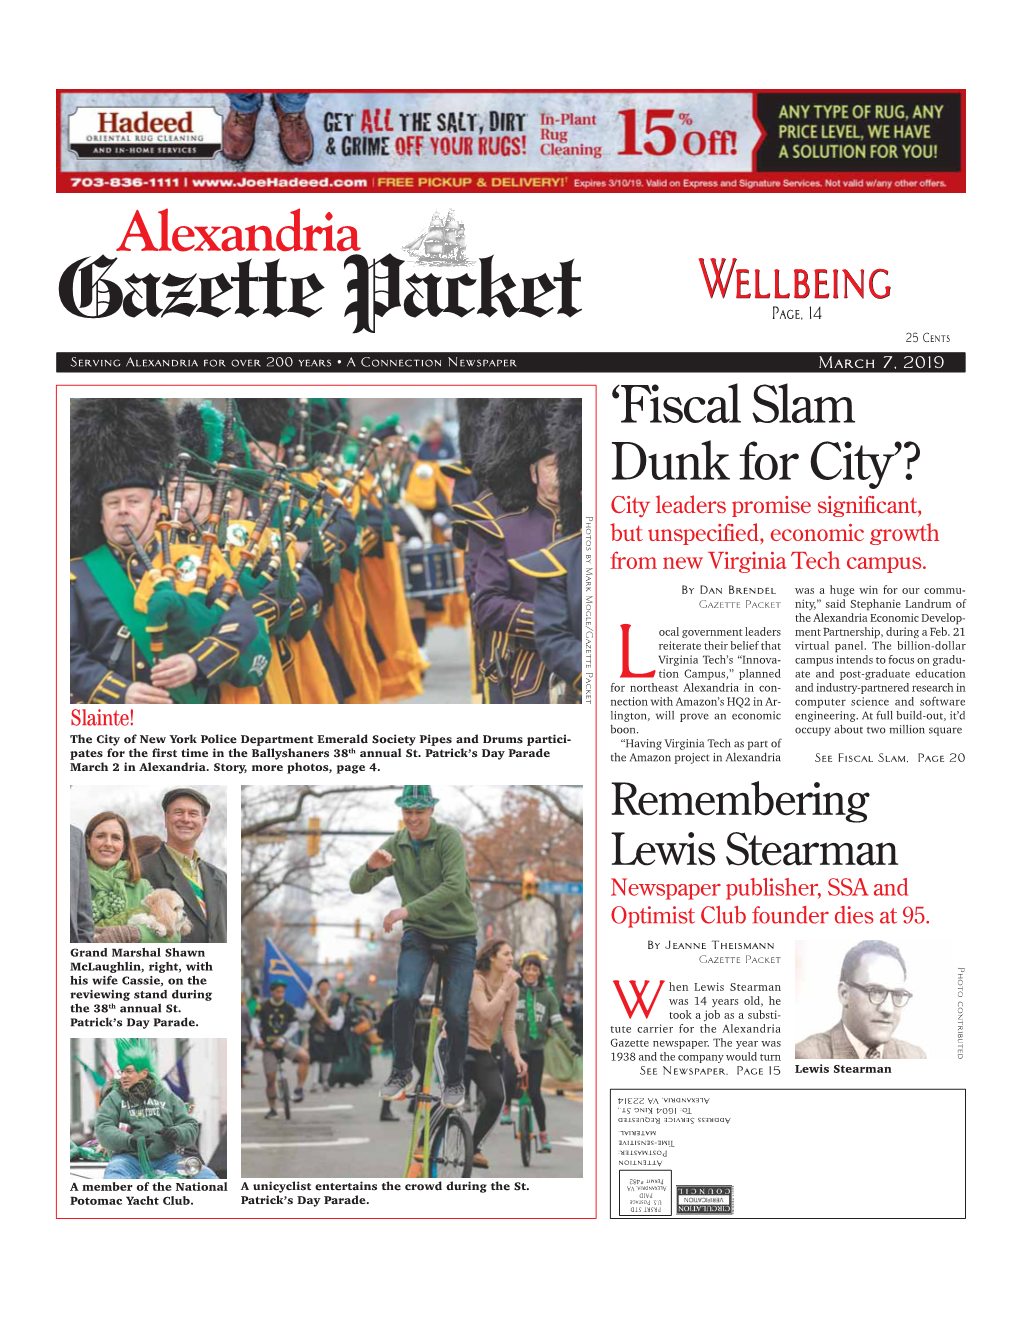 Alexandria Wellbeing Gazette Packet Page, 14 25 Cents Serving Alexandria for Over 200 Years • a Connection Newspaper March 7, 2019 ‘Fiscal Slam Dunk for City’?